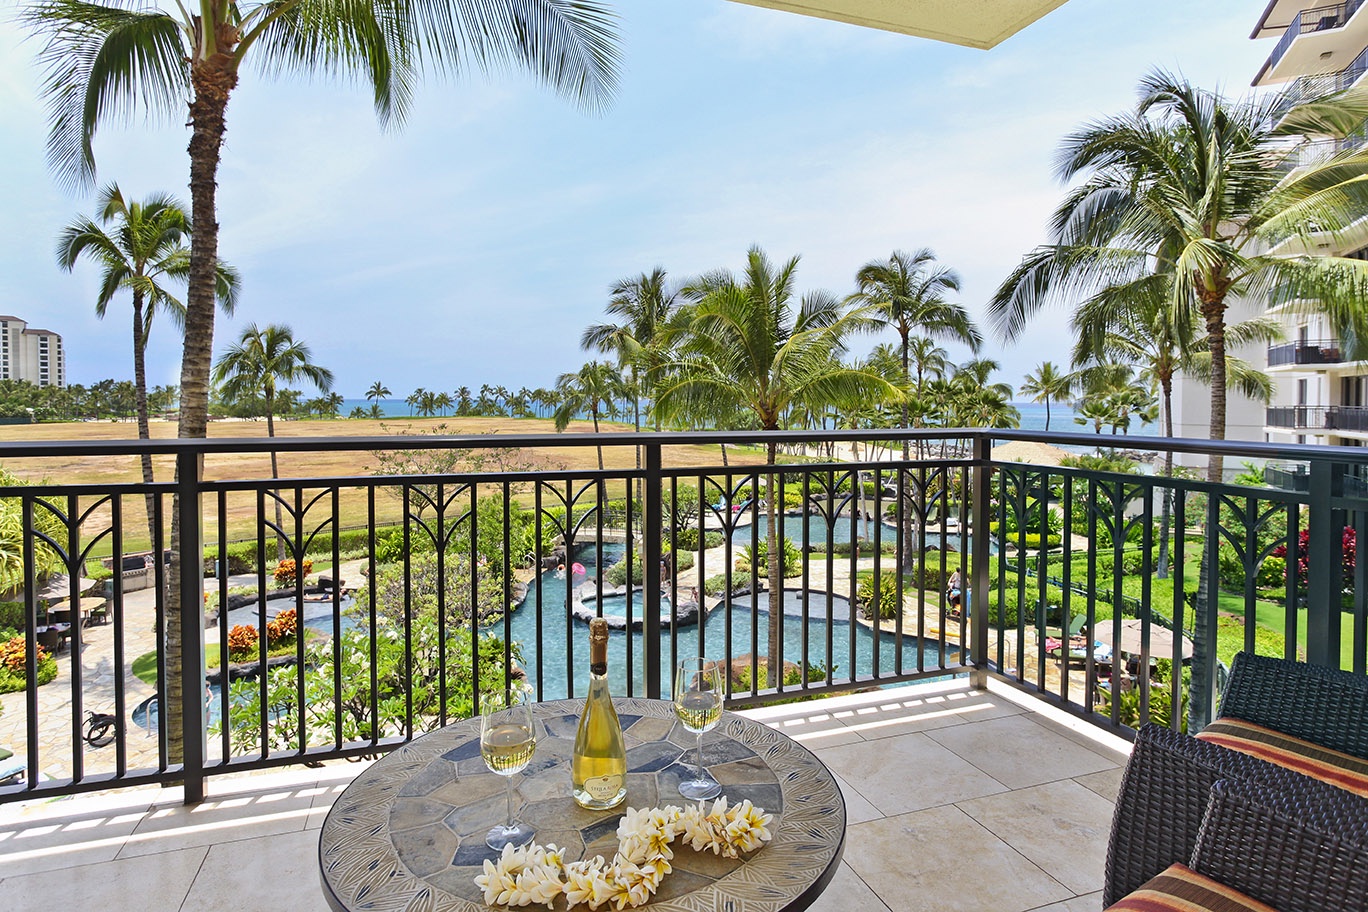 Kapolei Vacation Rentals, Ko Olina Beach Villas B301 - Every day is vacation with the sun and the sea.